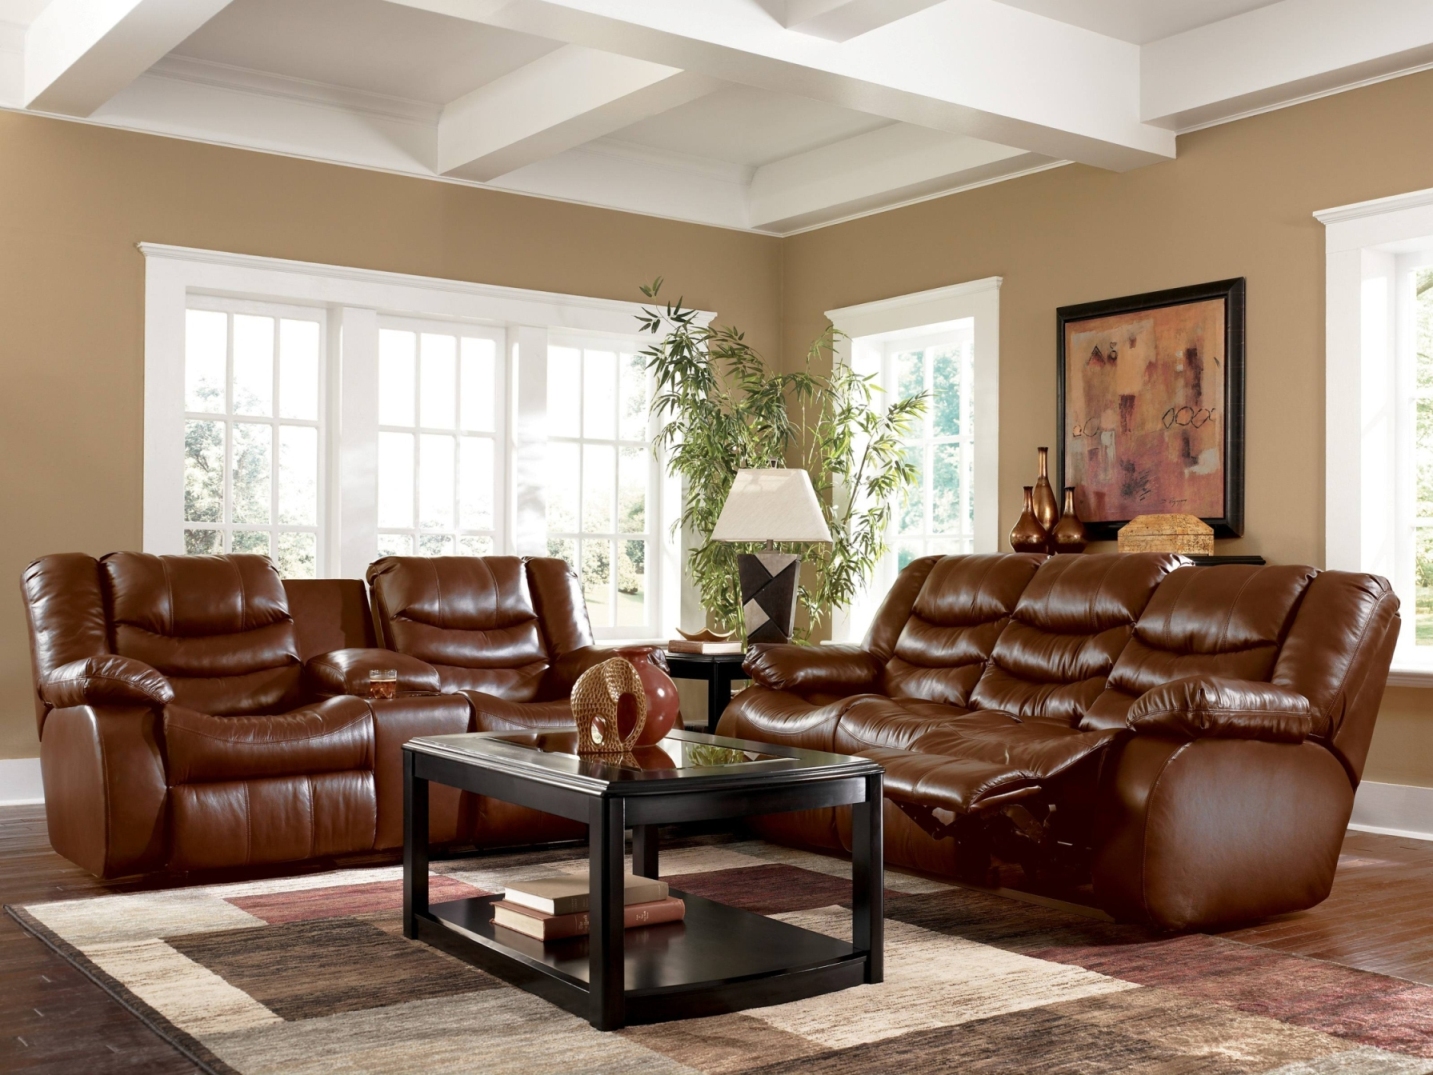 fossil brown furniture living room ideas